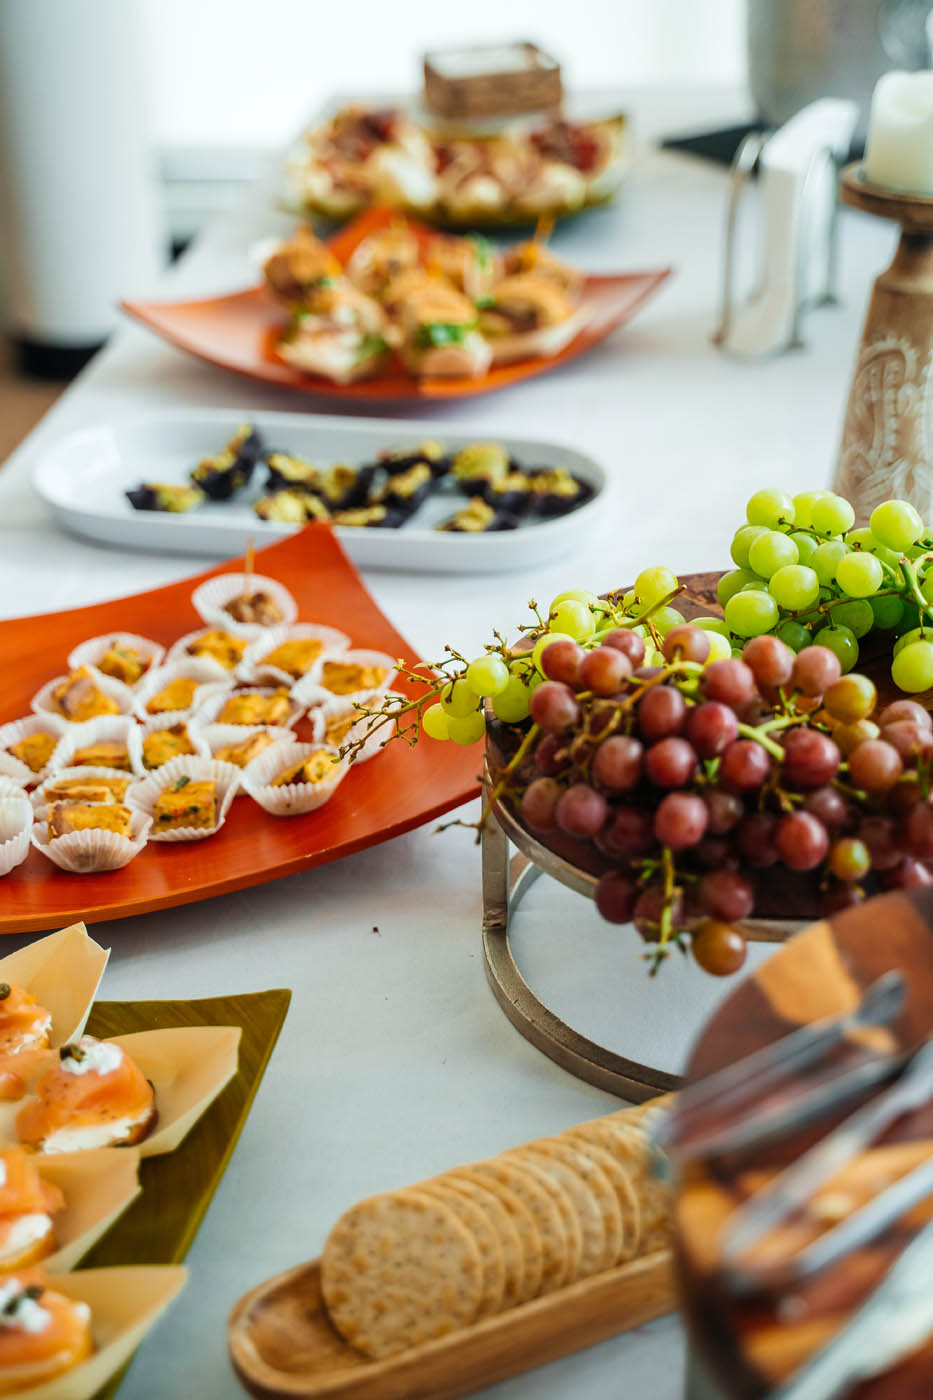 A fresh plate of grapes at The Real Food Academy Miami cooking birthday parties.